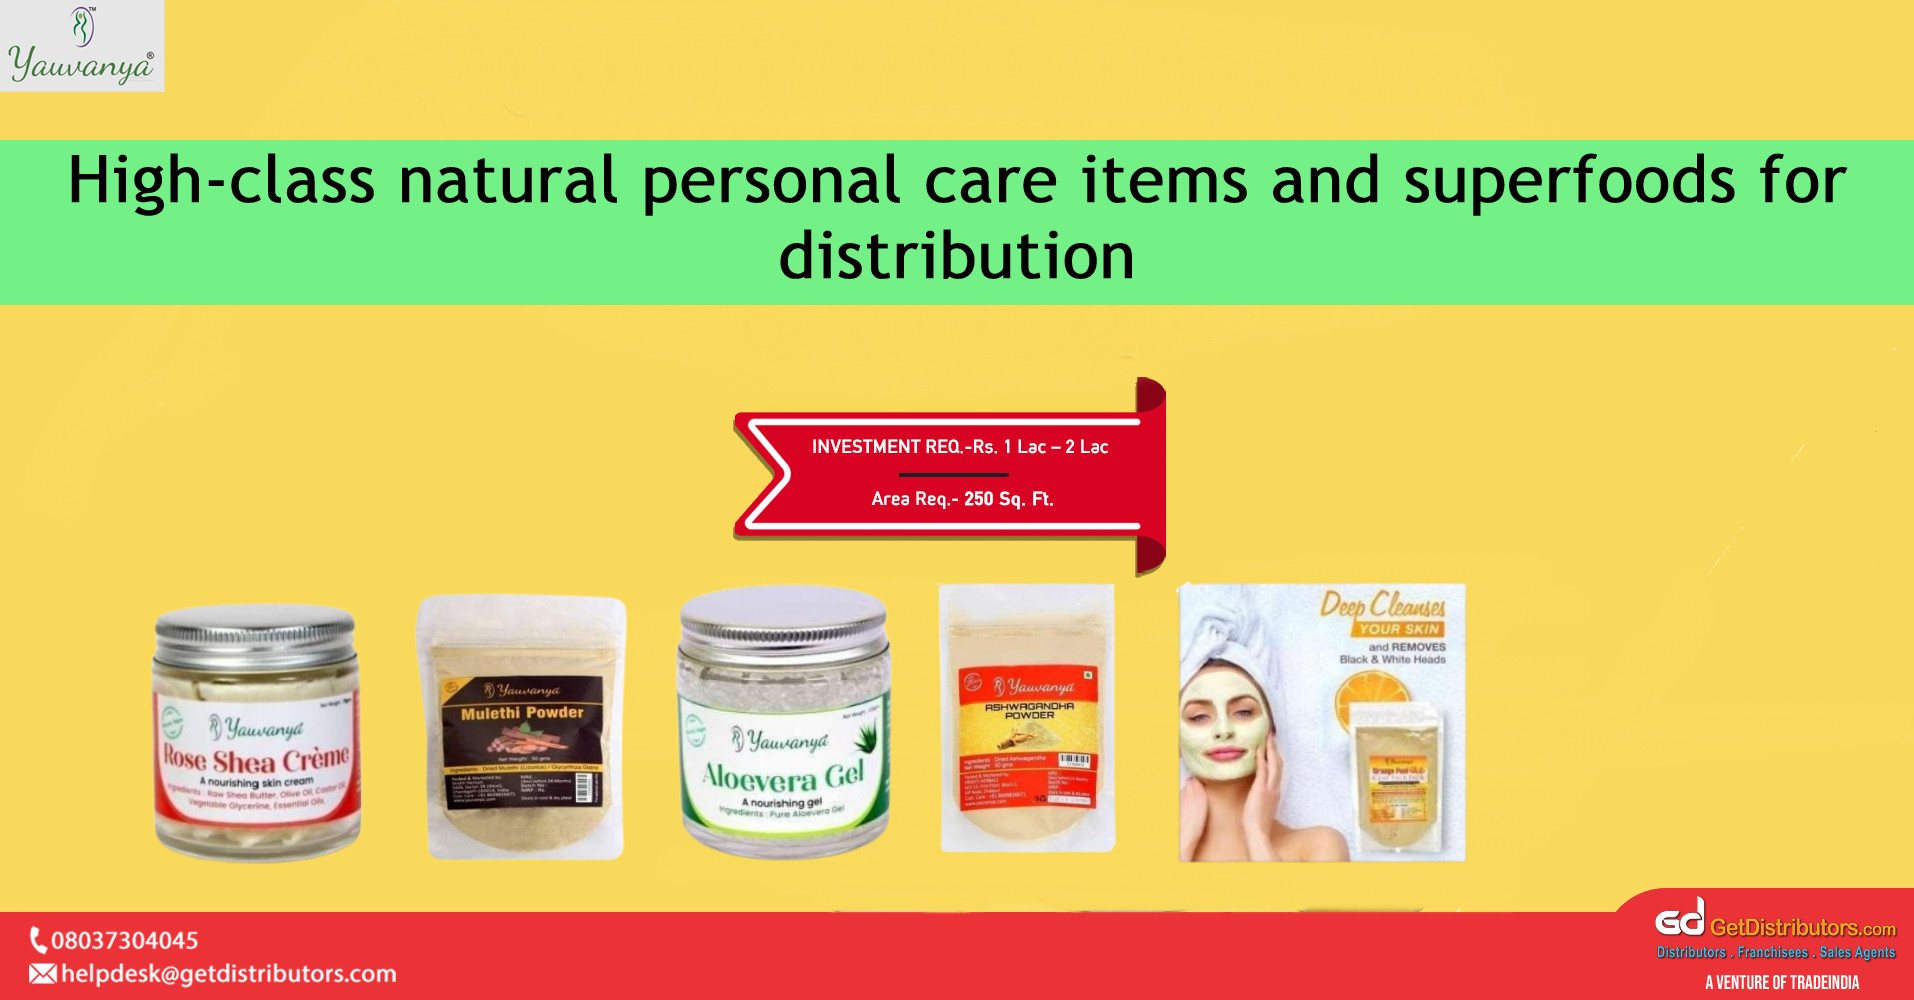 High-class natural personal care items and superfoods for distribution